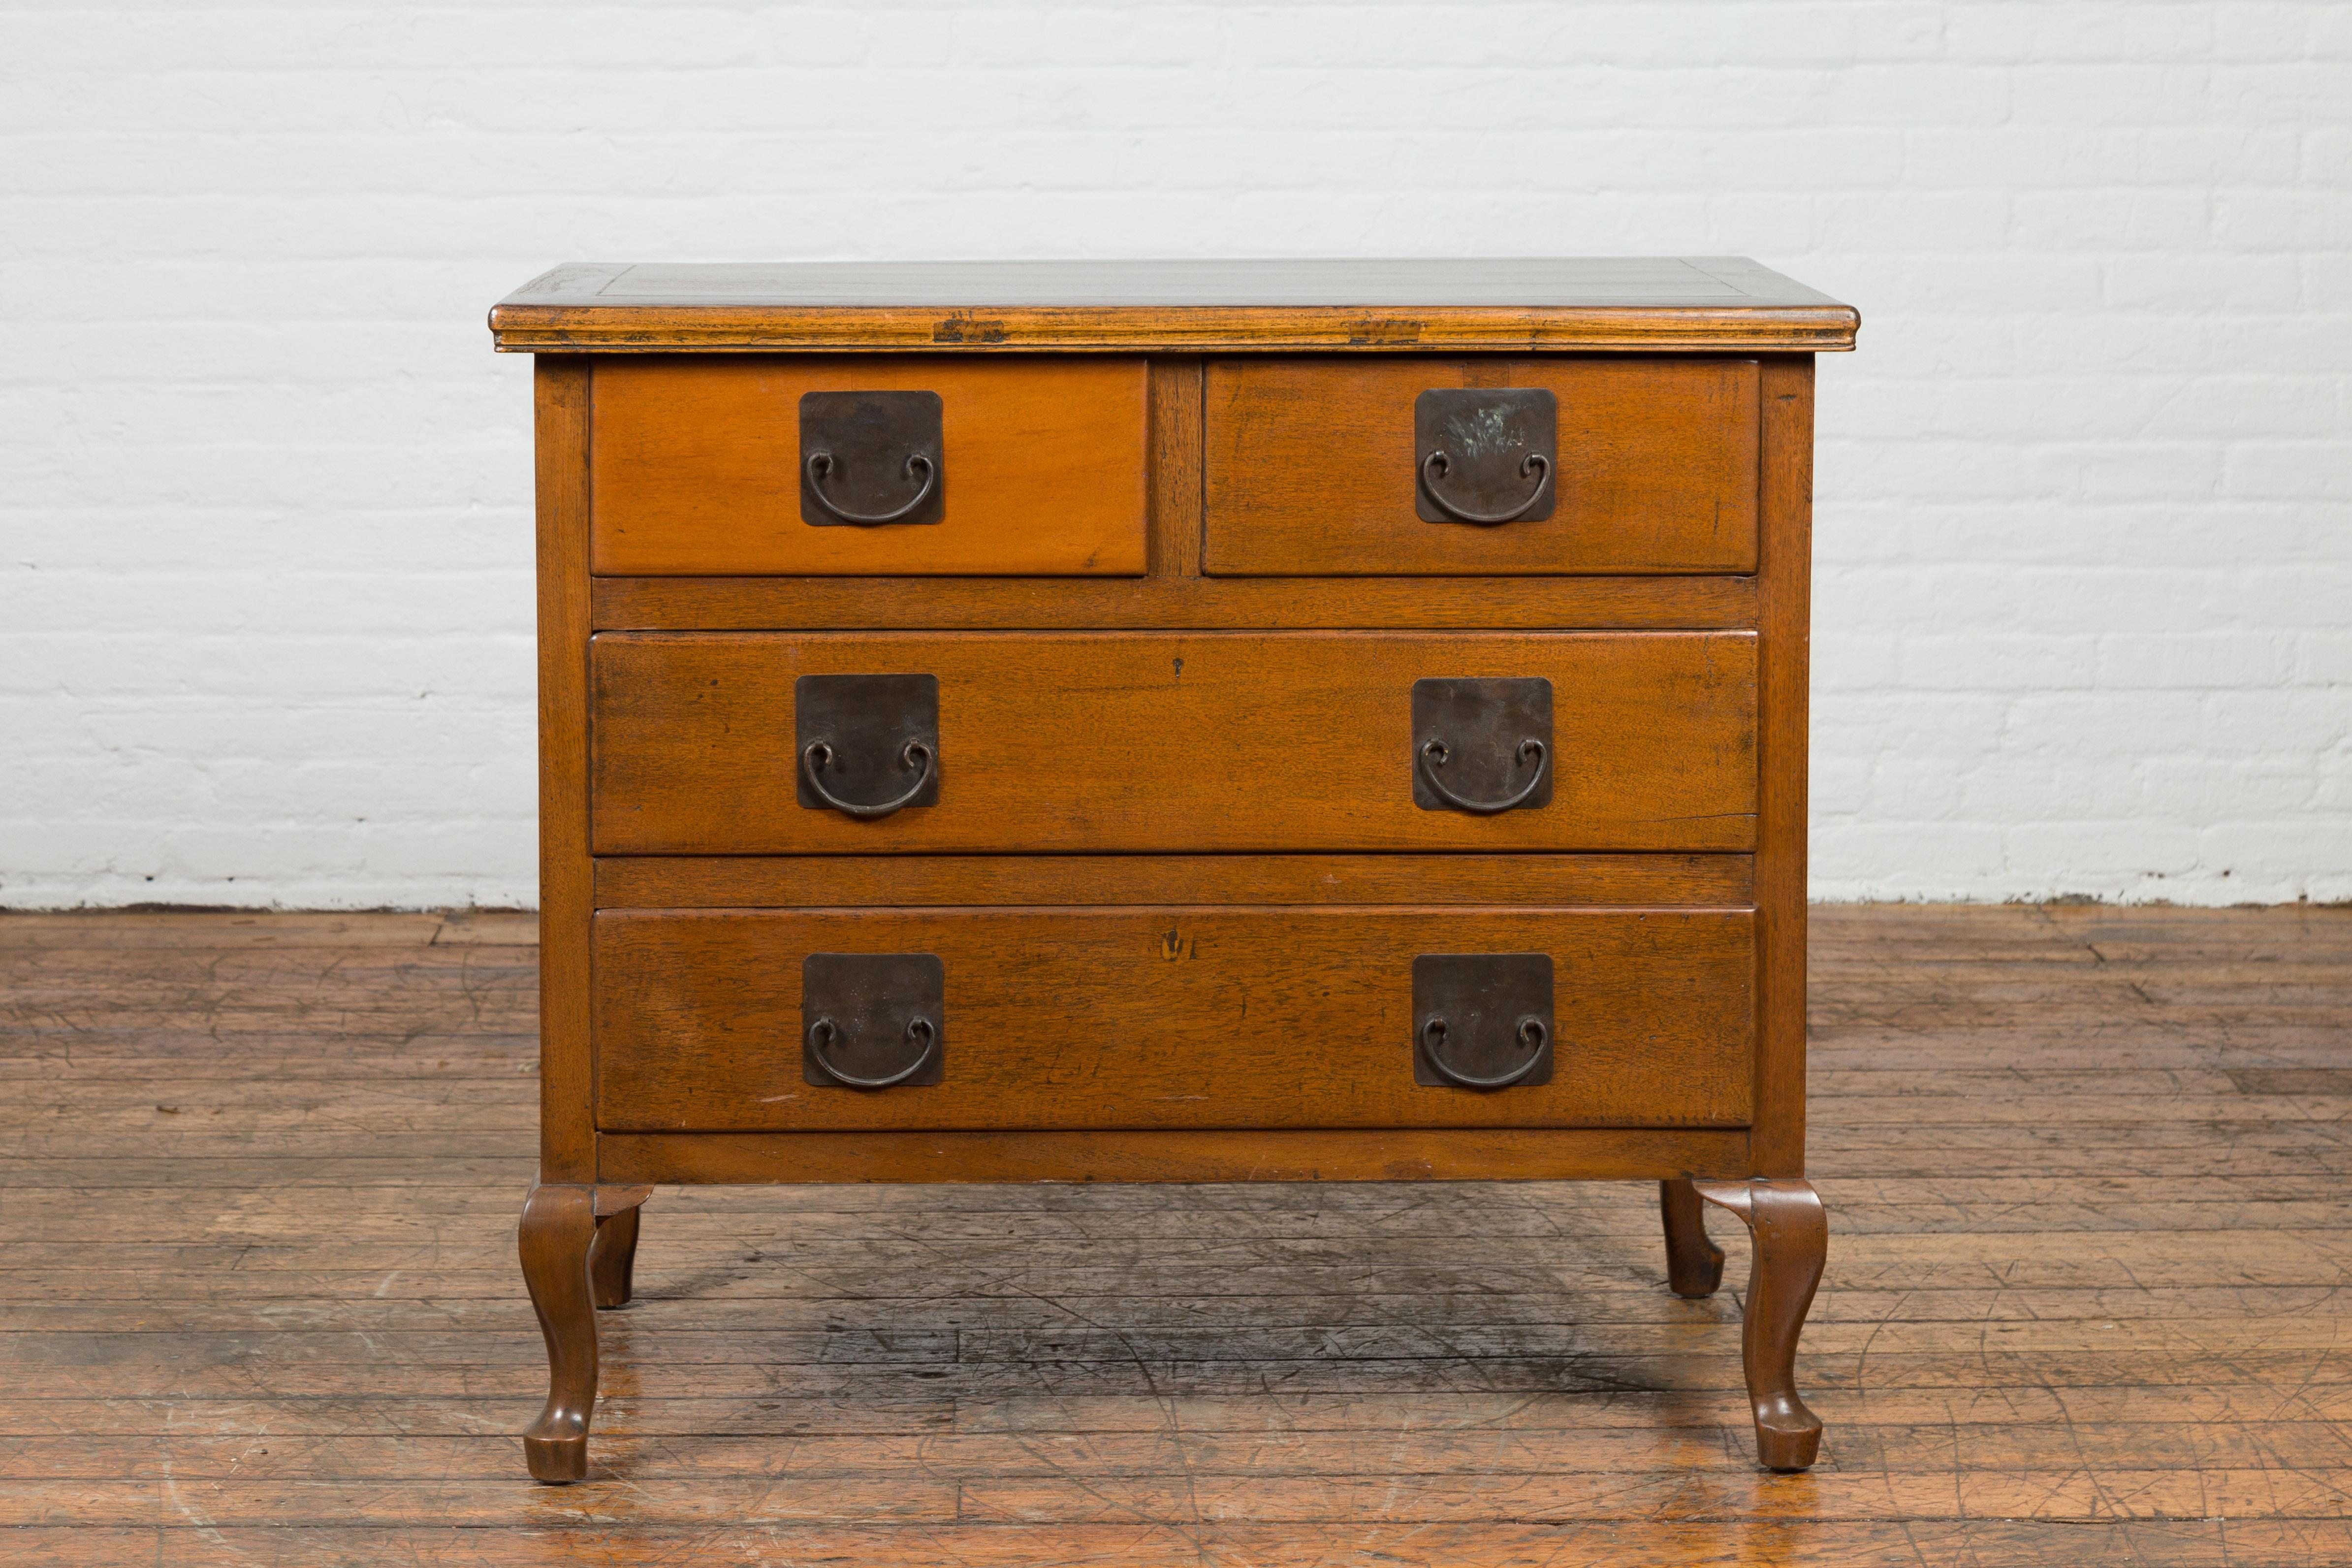 A beautiful Chinese vintage four-drawer dresser chest from the mid 20th century with warm caramel patina and iron hardware. Our vintage chest features a long rectangular top offering ample room for decorating while beneath two square shaped drawers